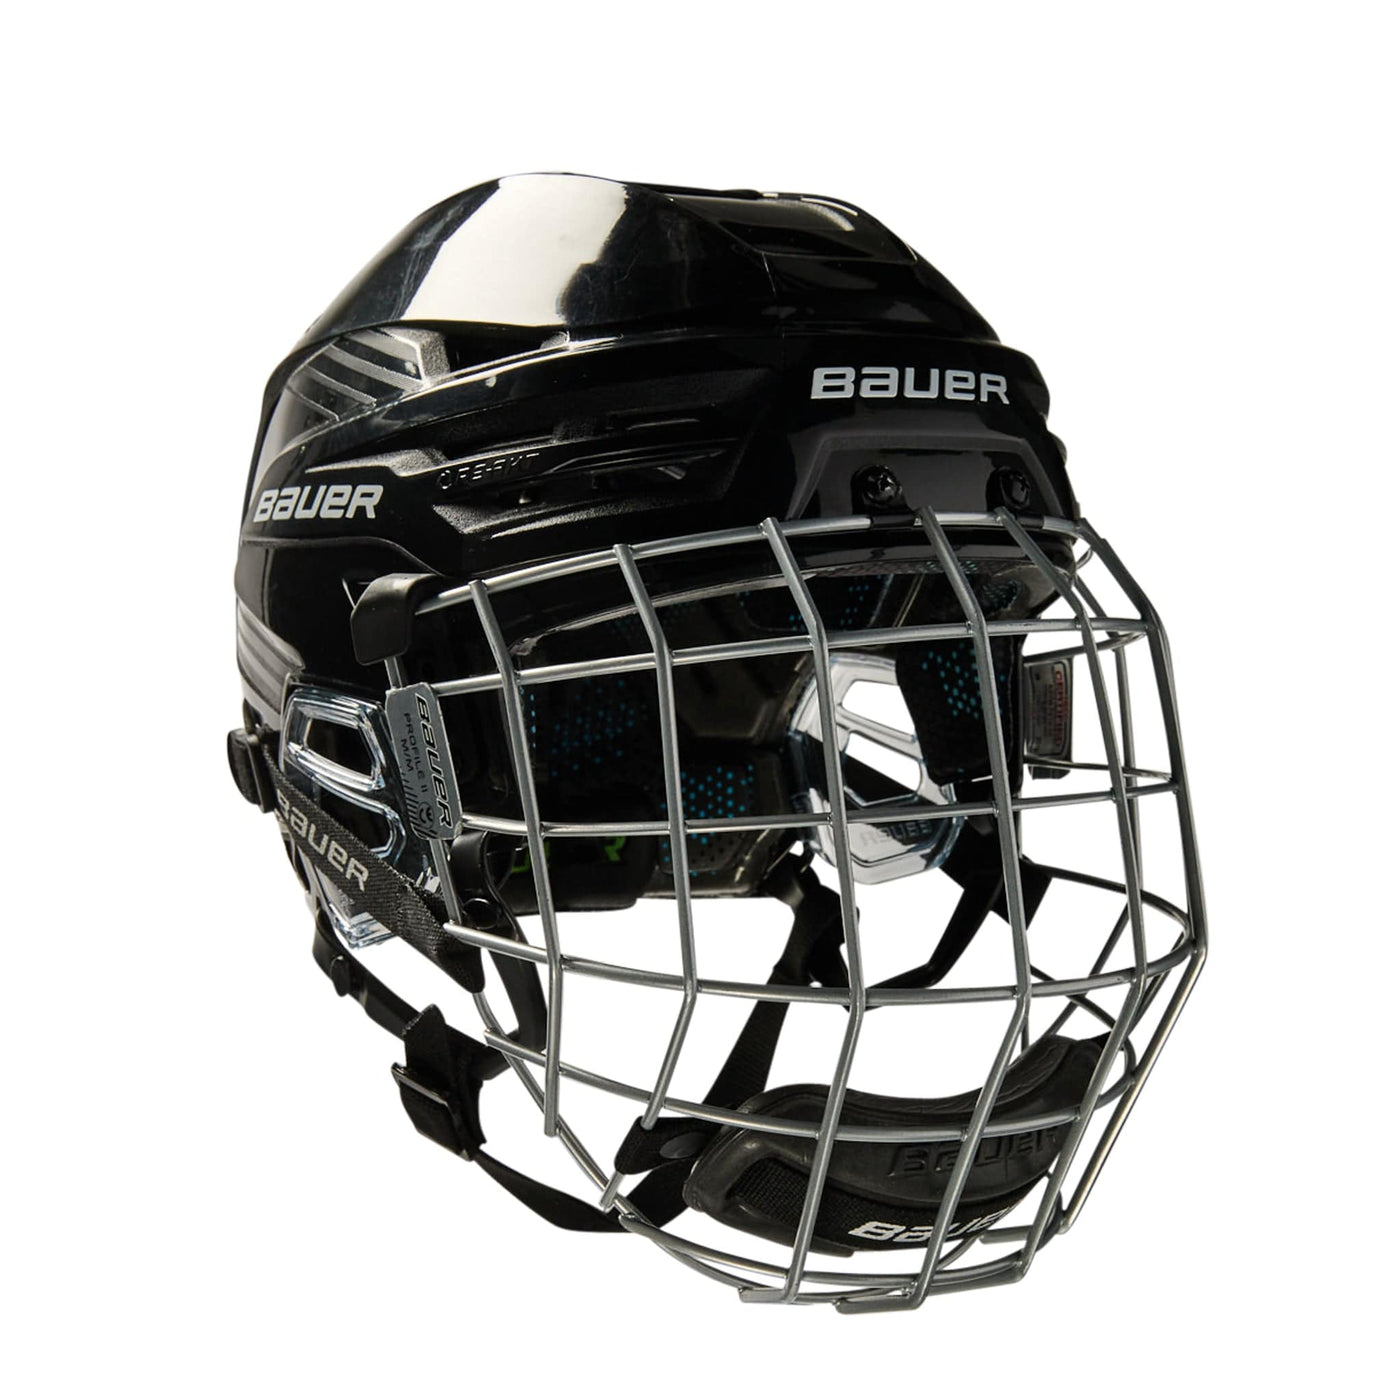 Bauer RE-AKT 85 Hockey Helmet / Cage Combo - The Hockey Shop Source For Sports